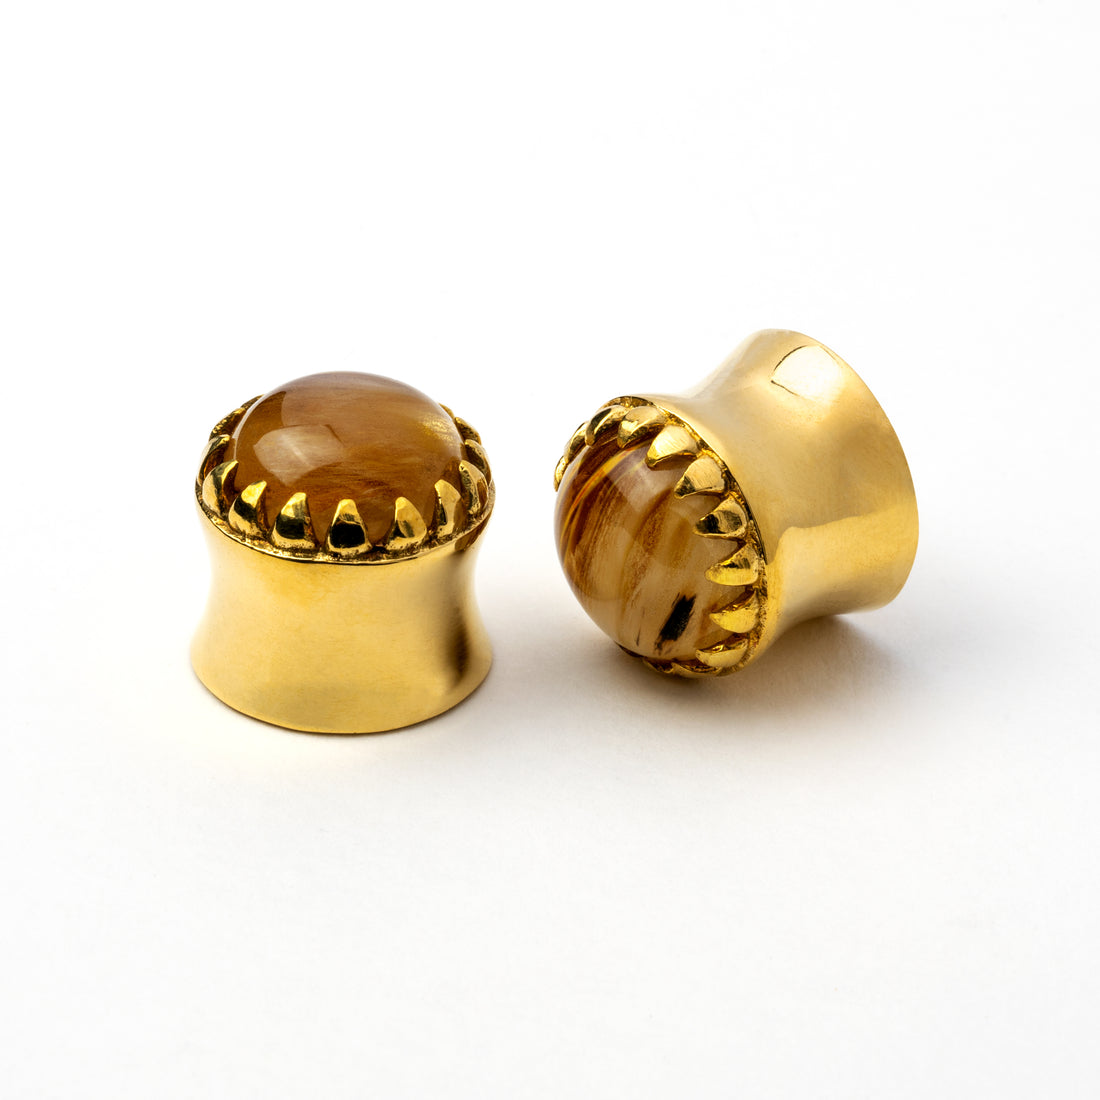 golden plug earring crown shaped with tiger eye glass